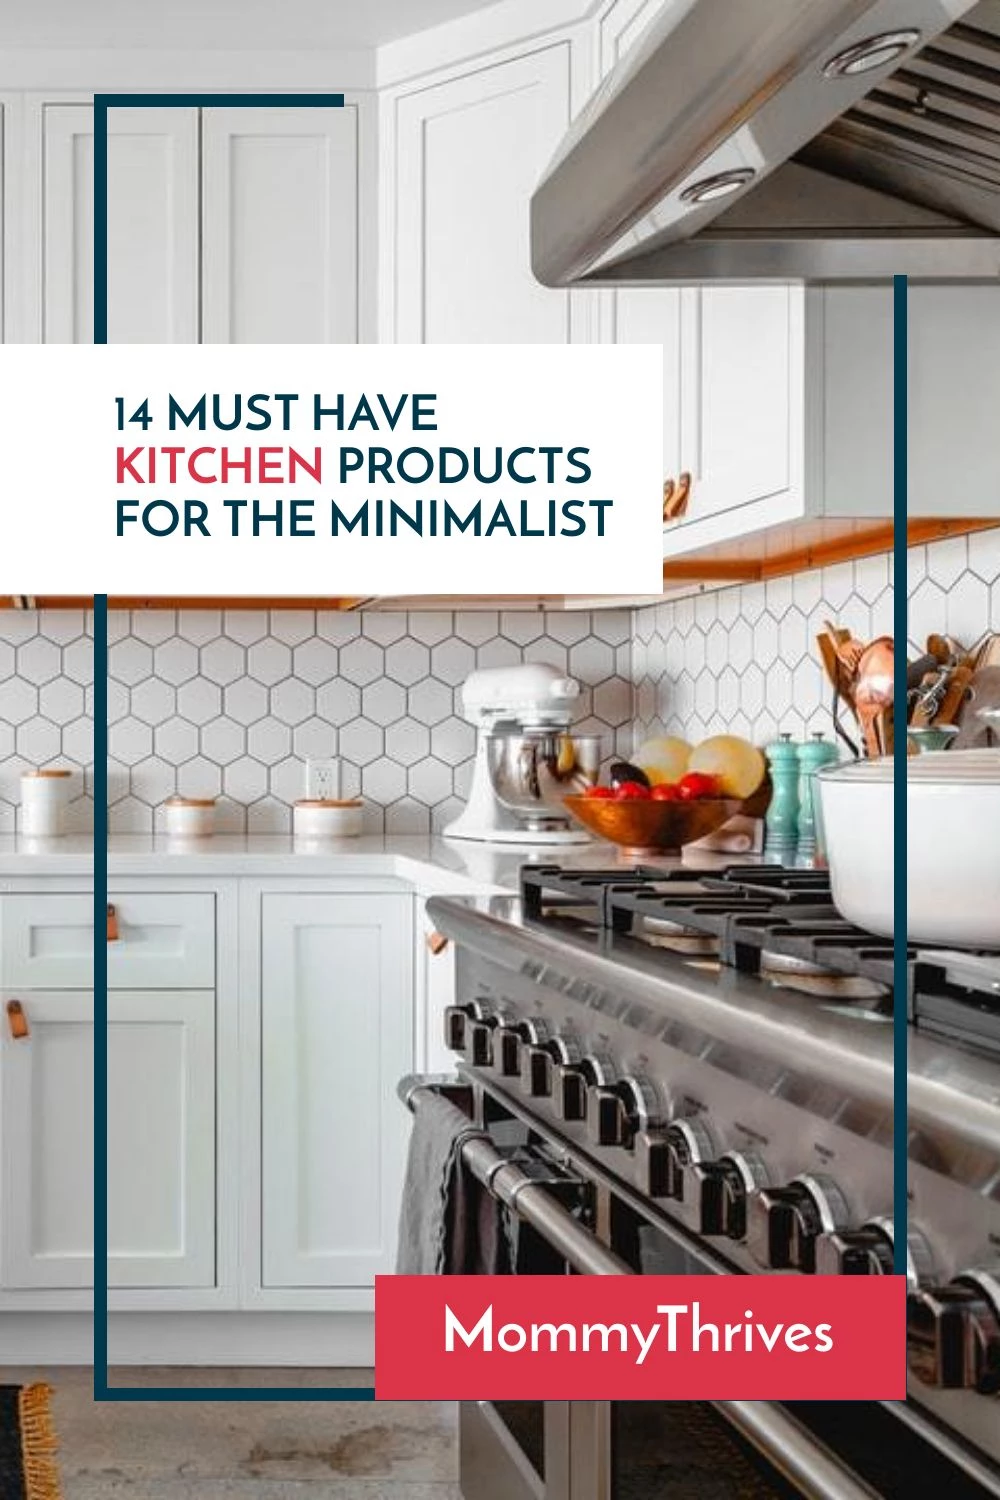 https://www.mommythrives.com/wp-content/uploads/2019/04/Minimalist-Kitchen-Essentials-For-Small-Spaces-Minimalist-Kitchen-Essentials-List-Minimalist-Kitchen-Essentials-To-Clear-Counter-Tops.webp